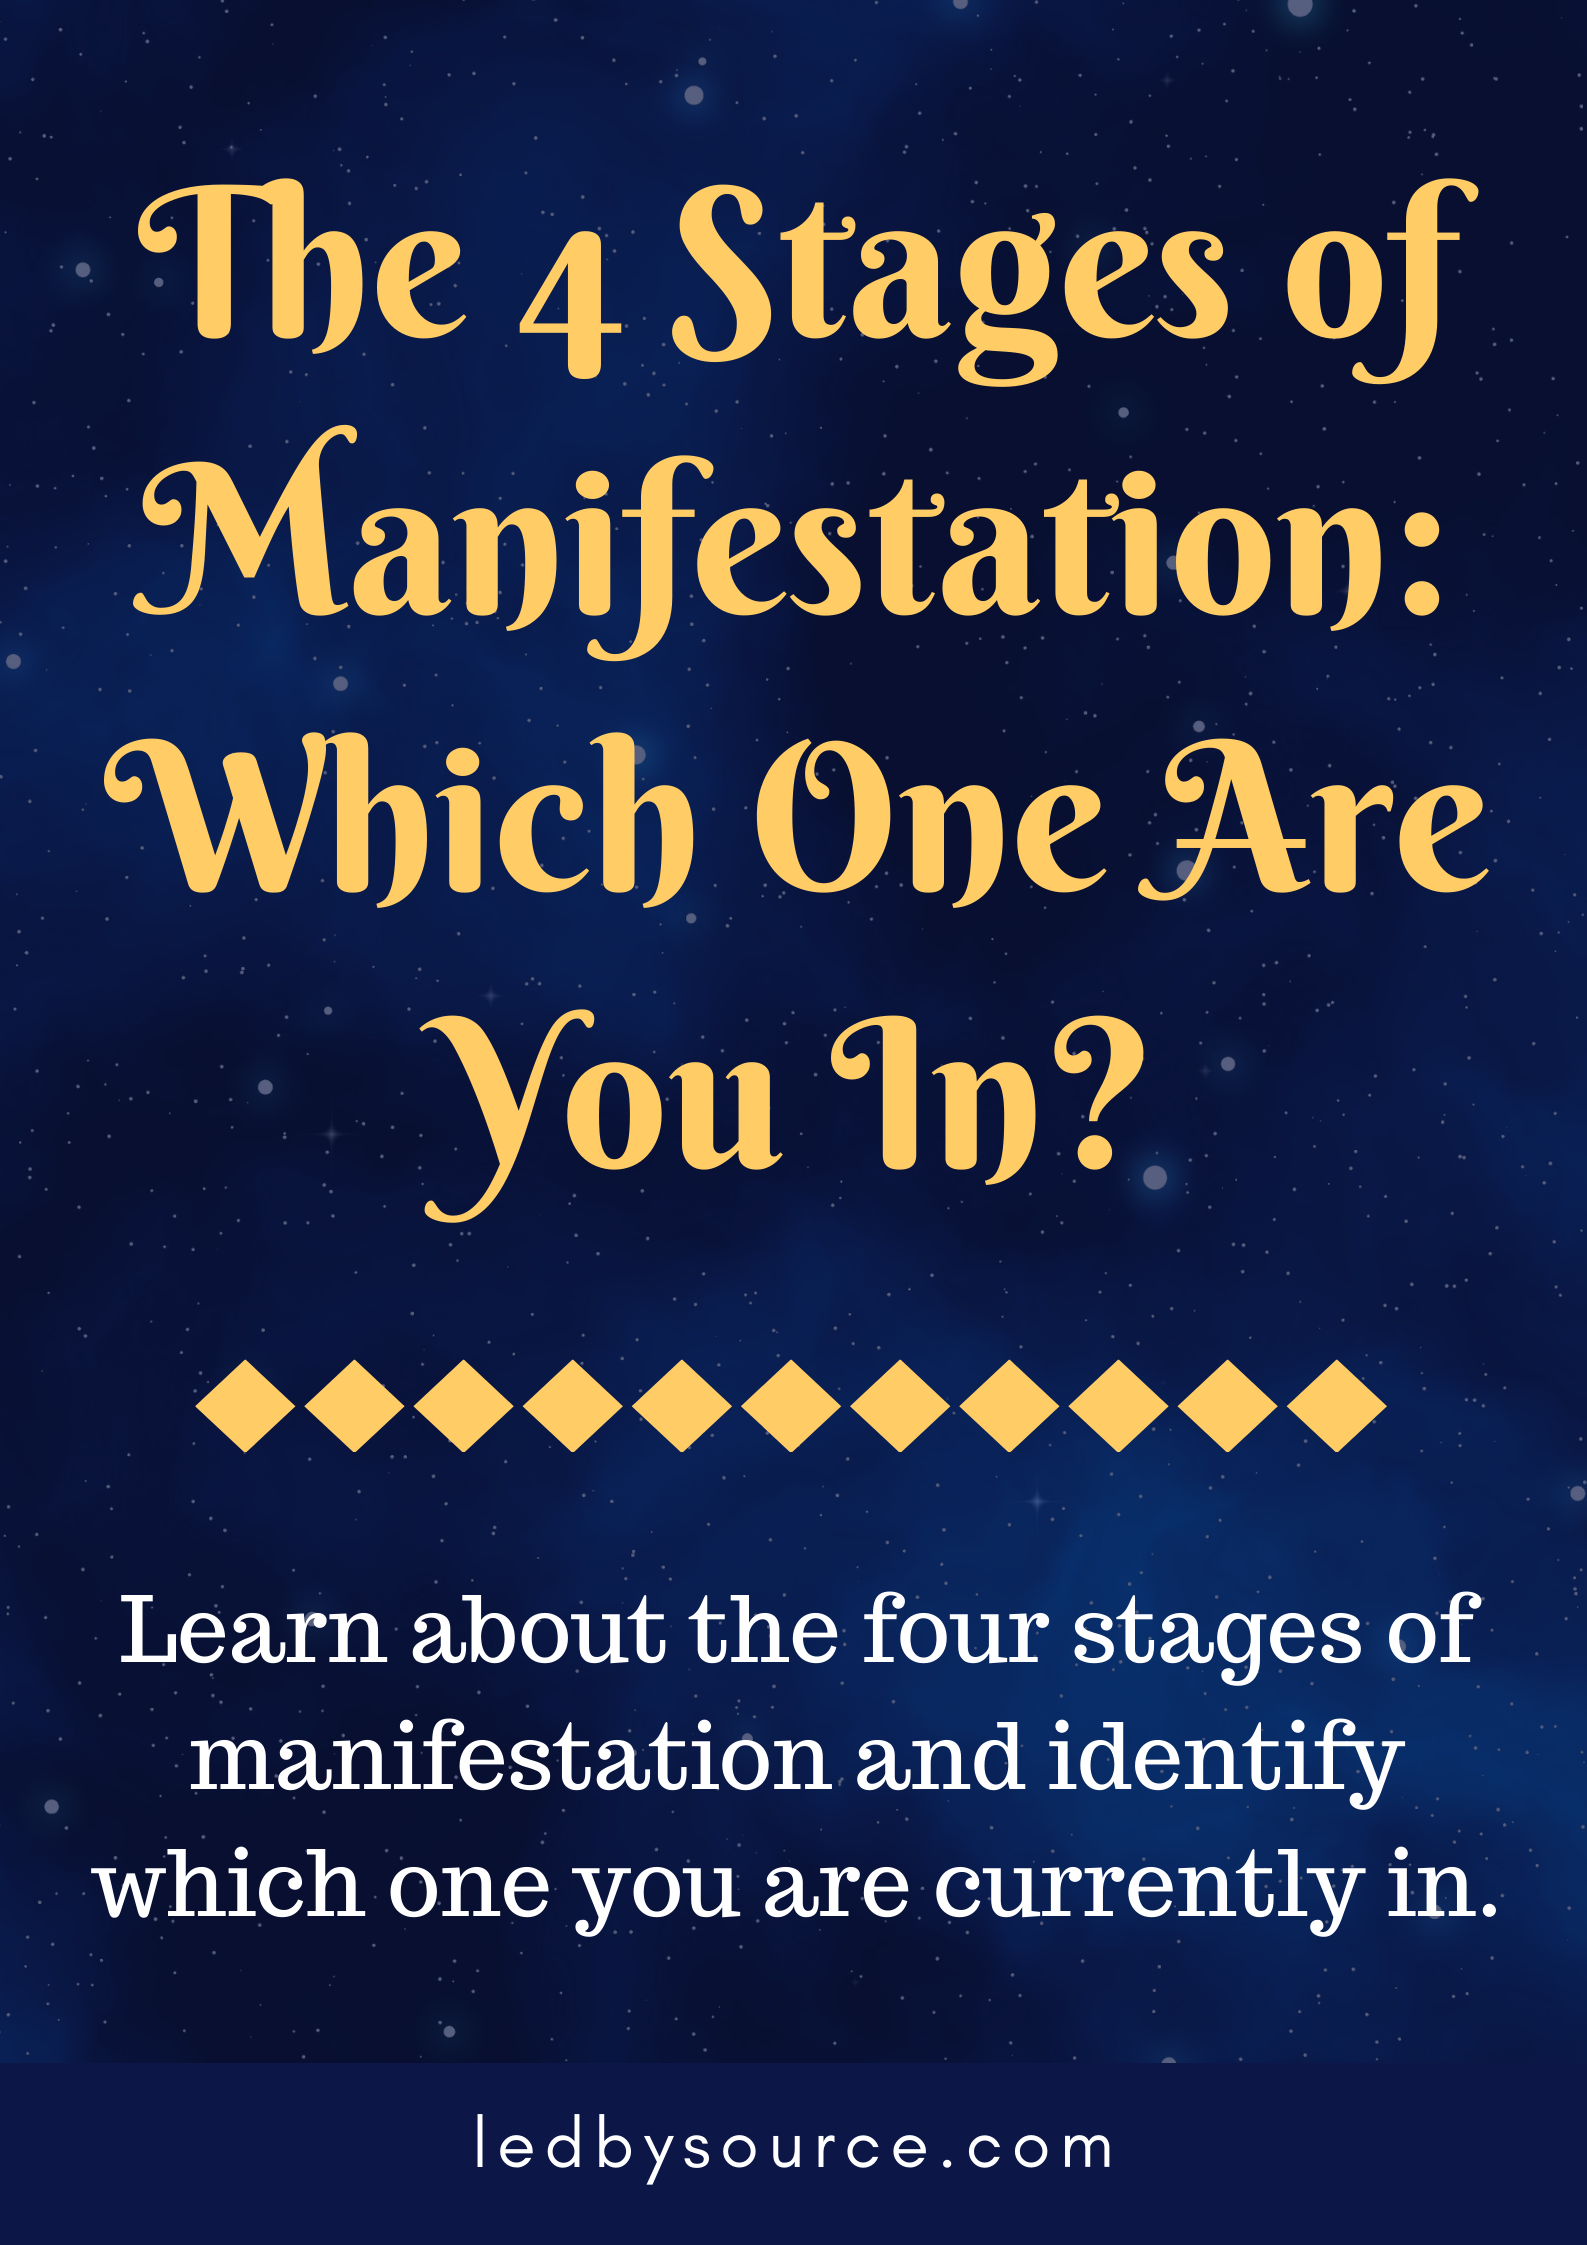 10 Manifestation Journal Examples That Will Powerfully Shift Your Reality